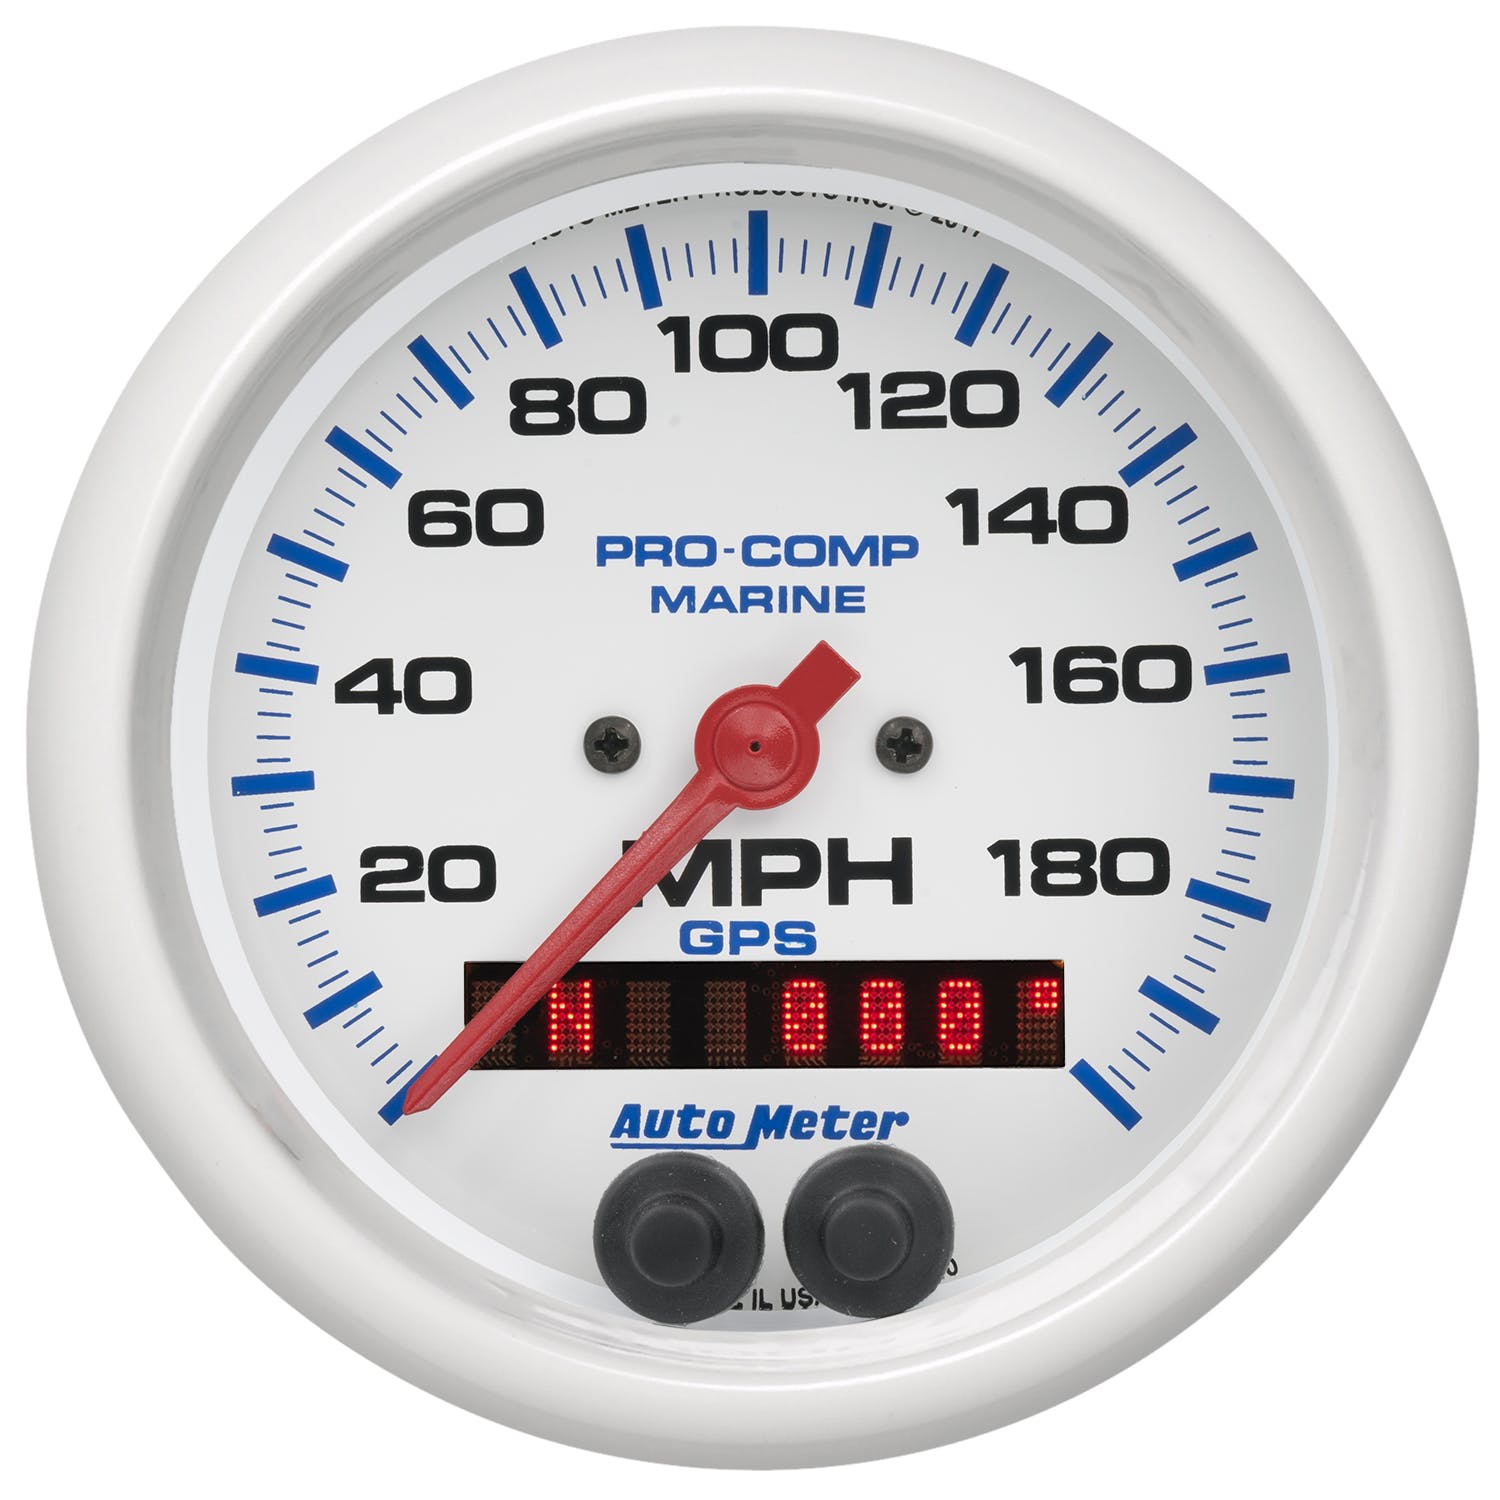 AutoMeter Products 200639 Marine White Speedometer Gauge 3 3/8, 200MPH, GPS